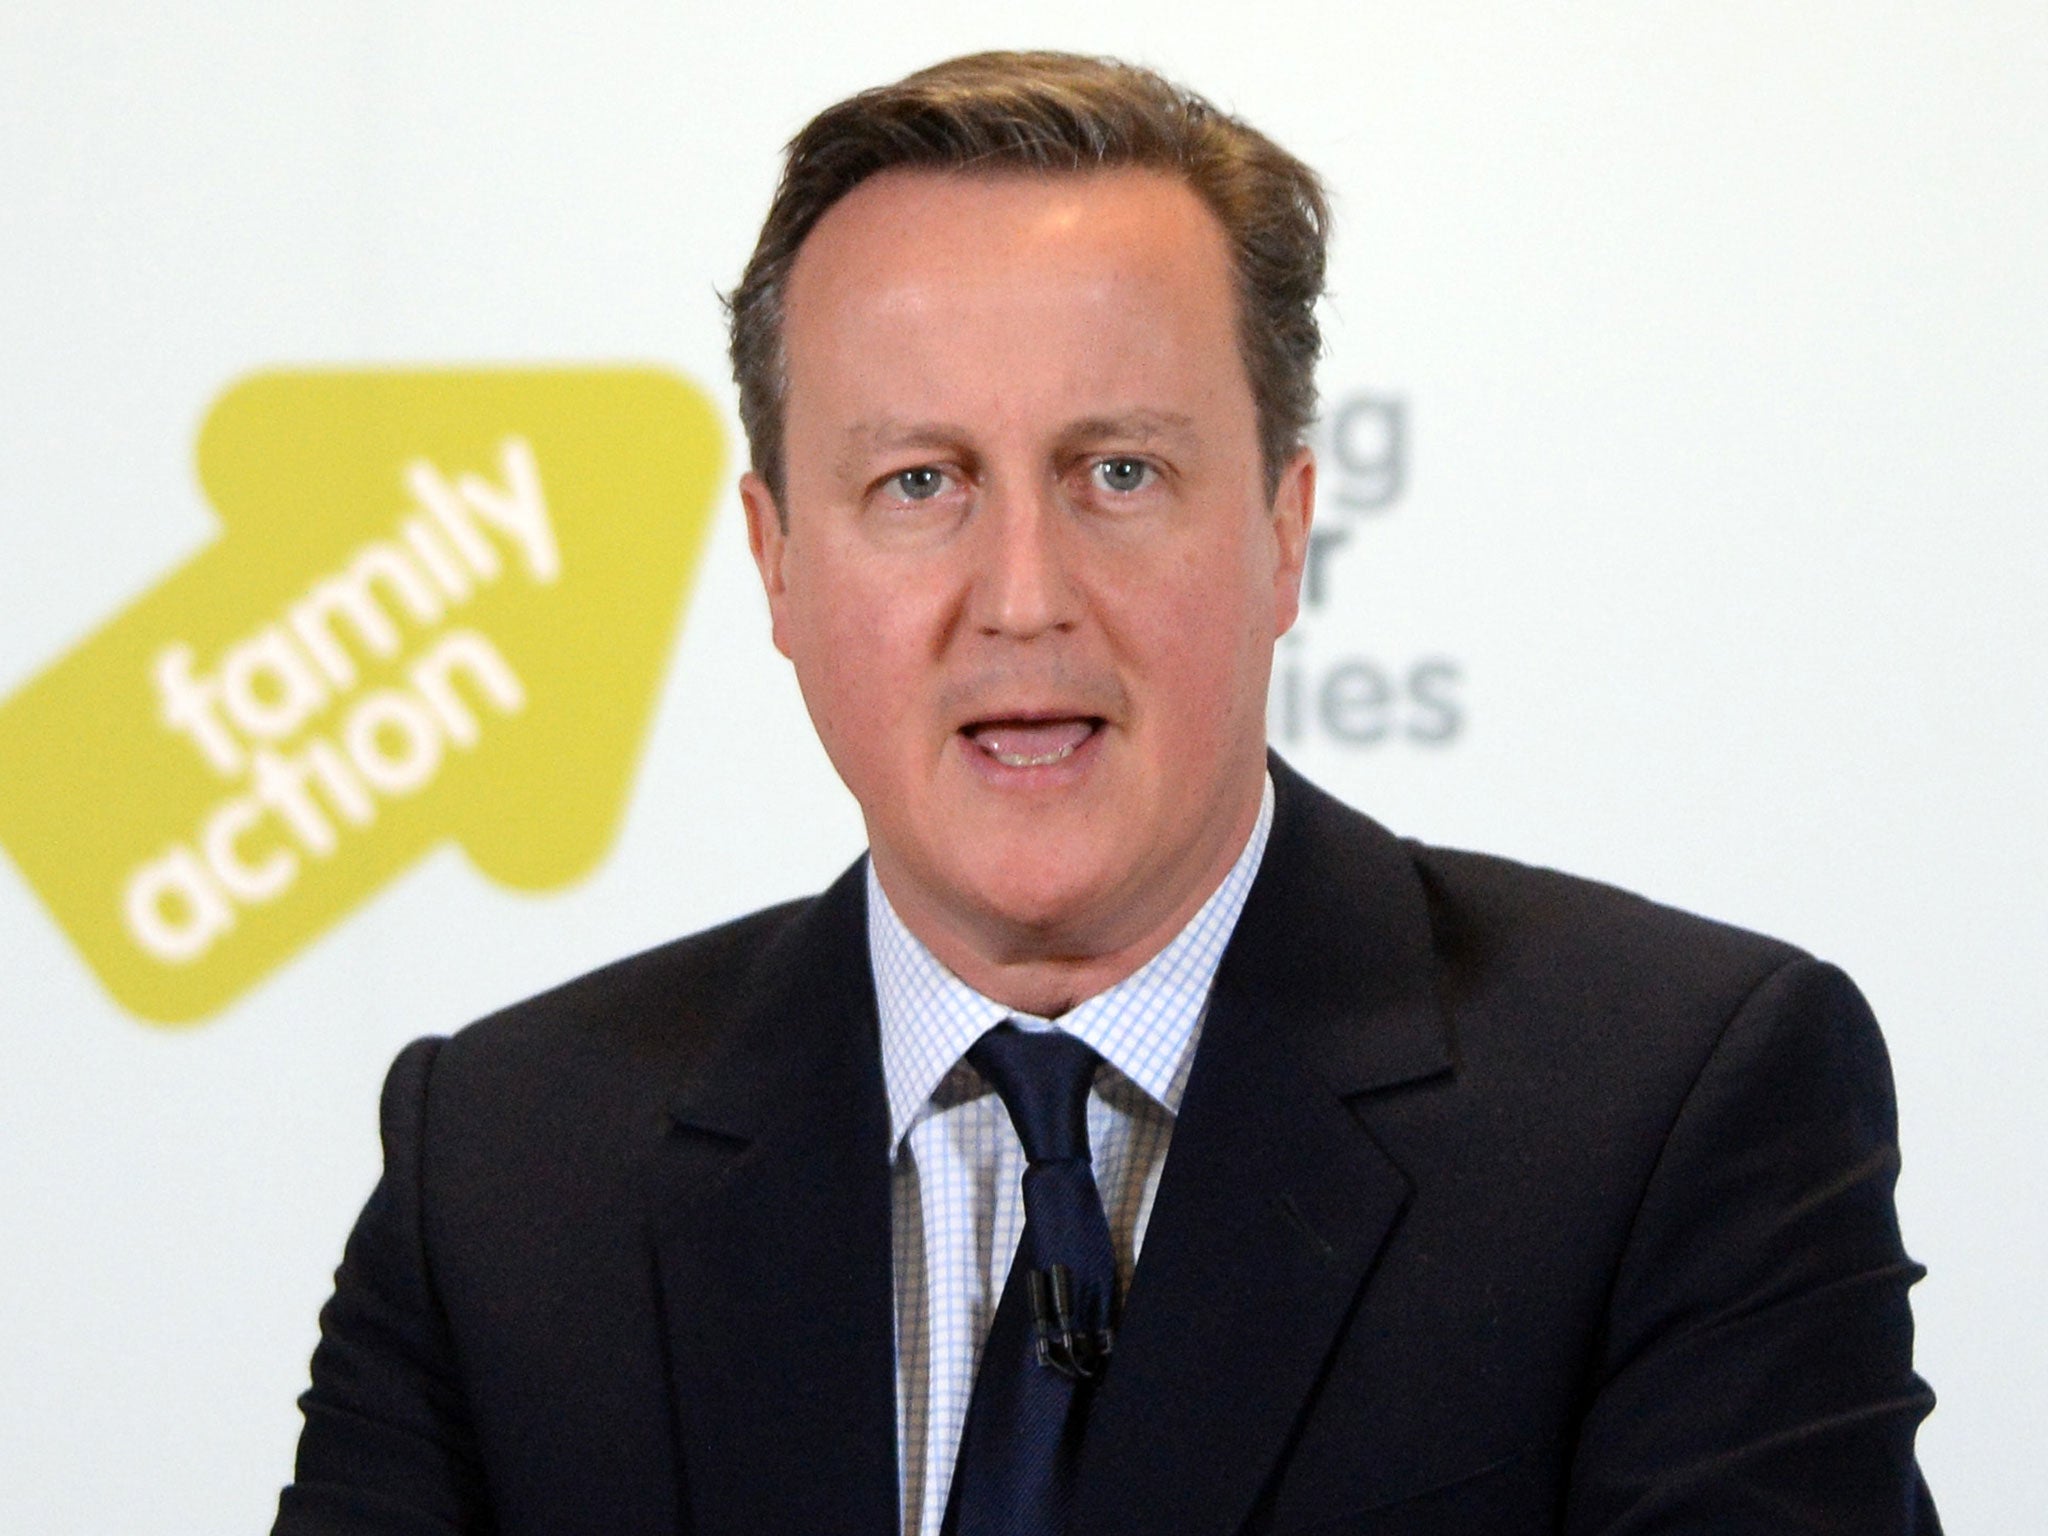 David Cameron has pledged to spend £1bn more on mental health by 2020